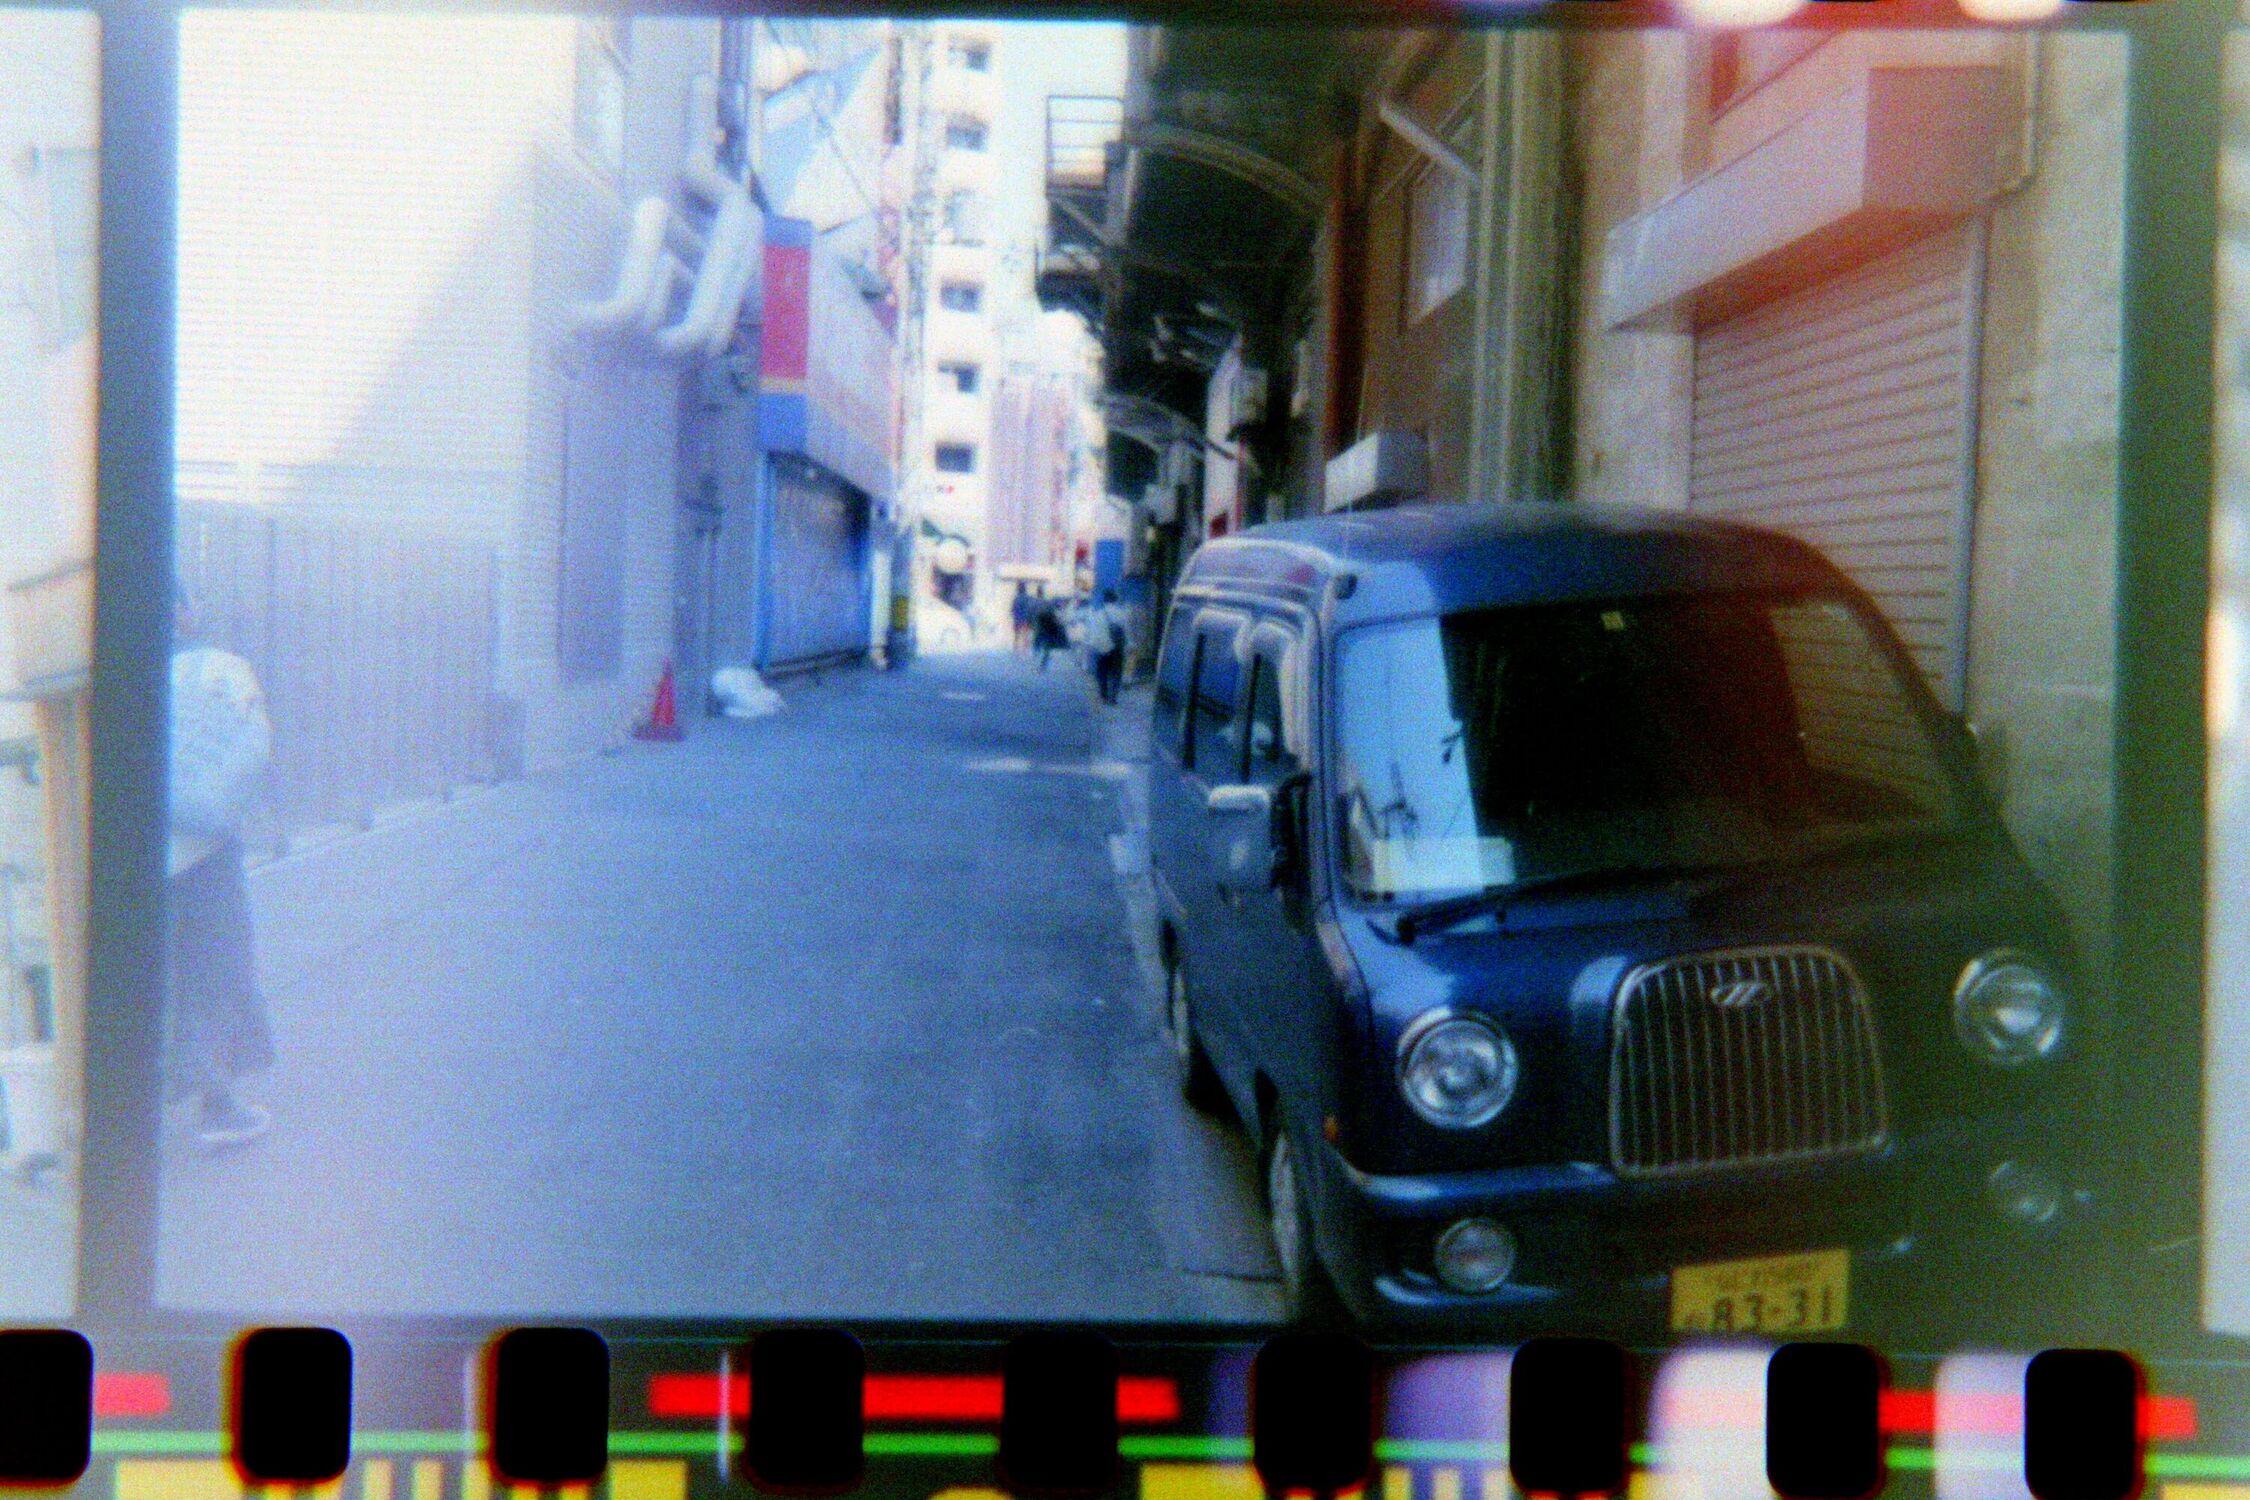 Photographic Negative of a car in an alleyway, now it looks like a regular photo